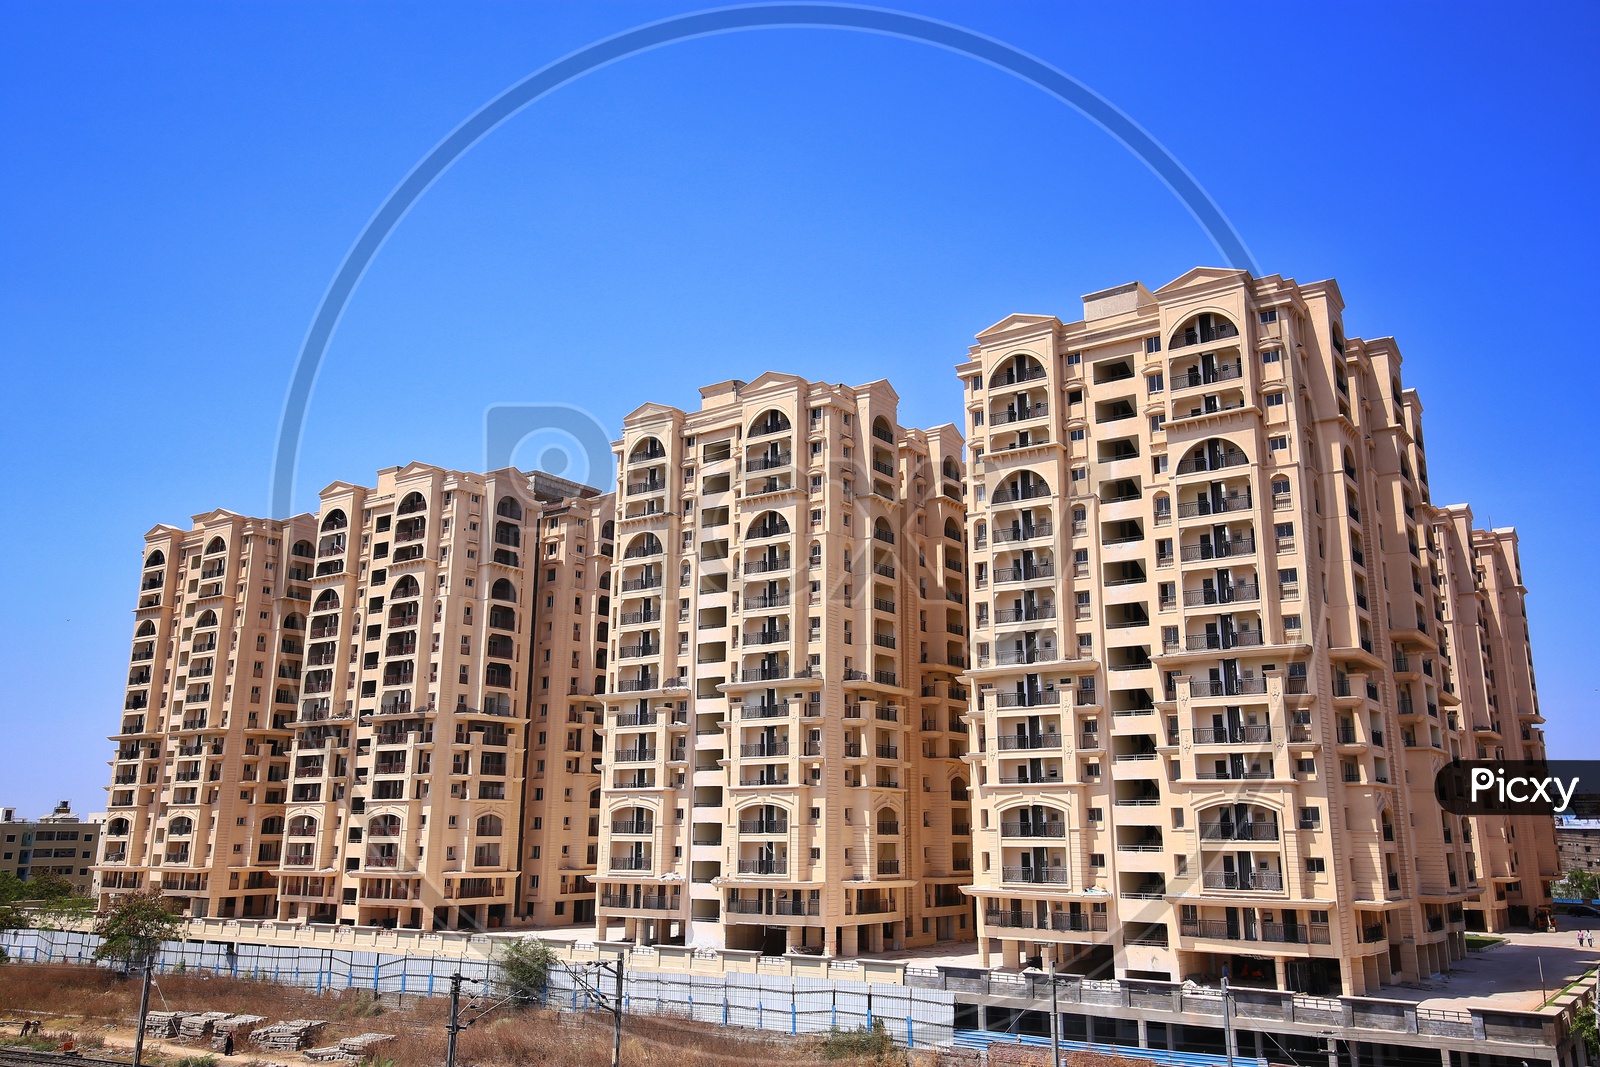 Aditya Empress heights Residential Apartments Or High Rise Buildings